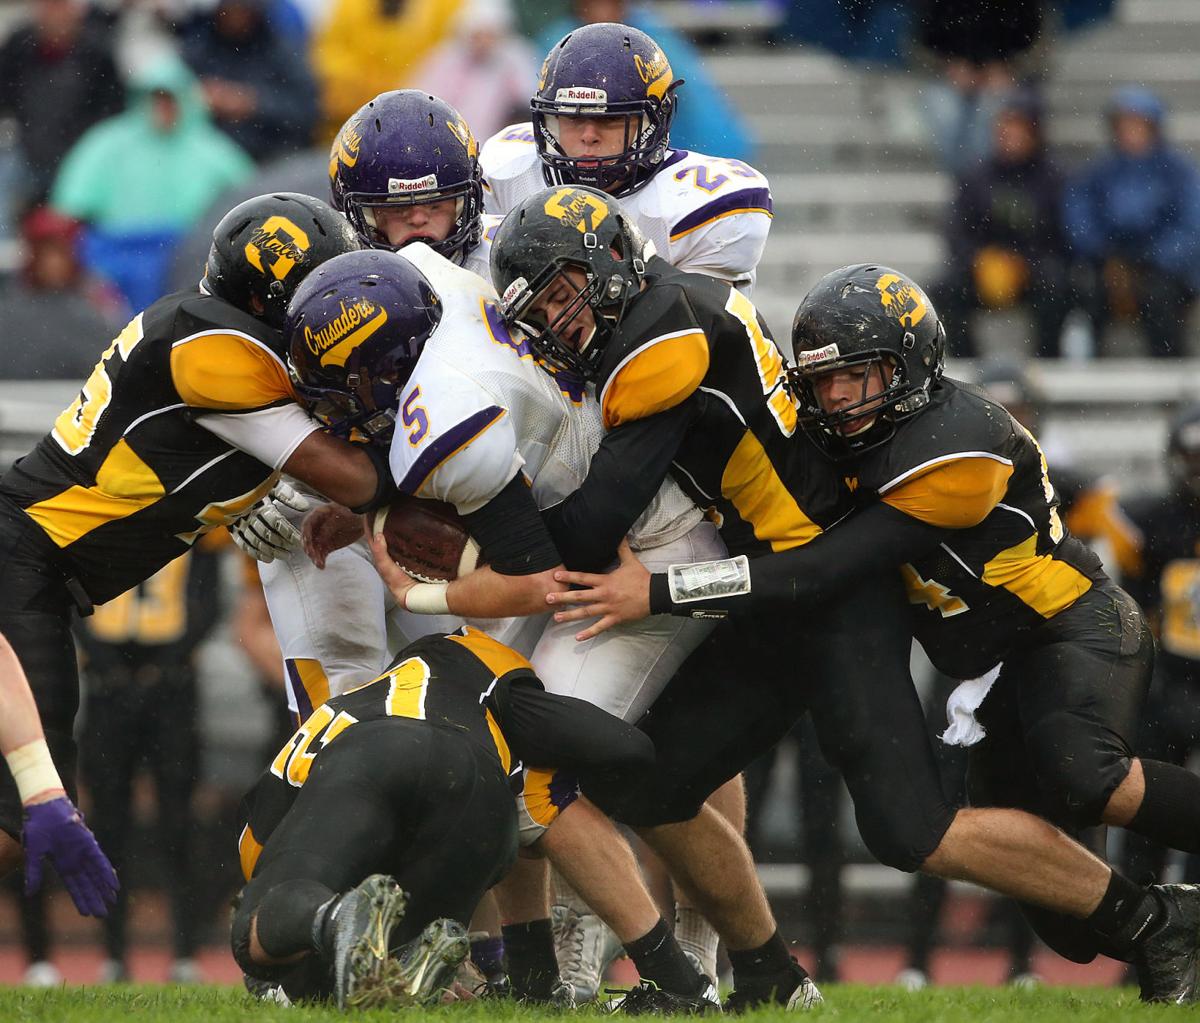 LL football Solanco keeps Downey in check in blowout win over